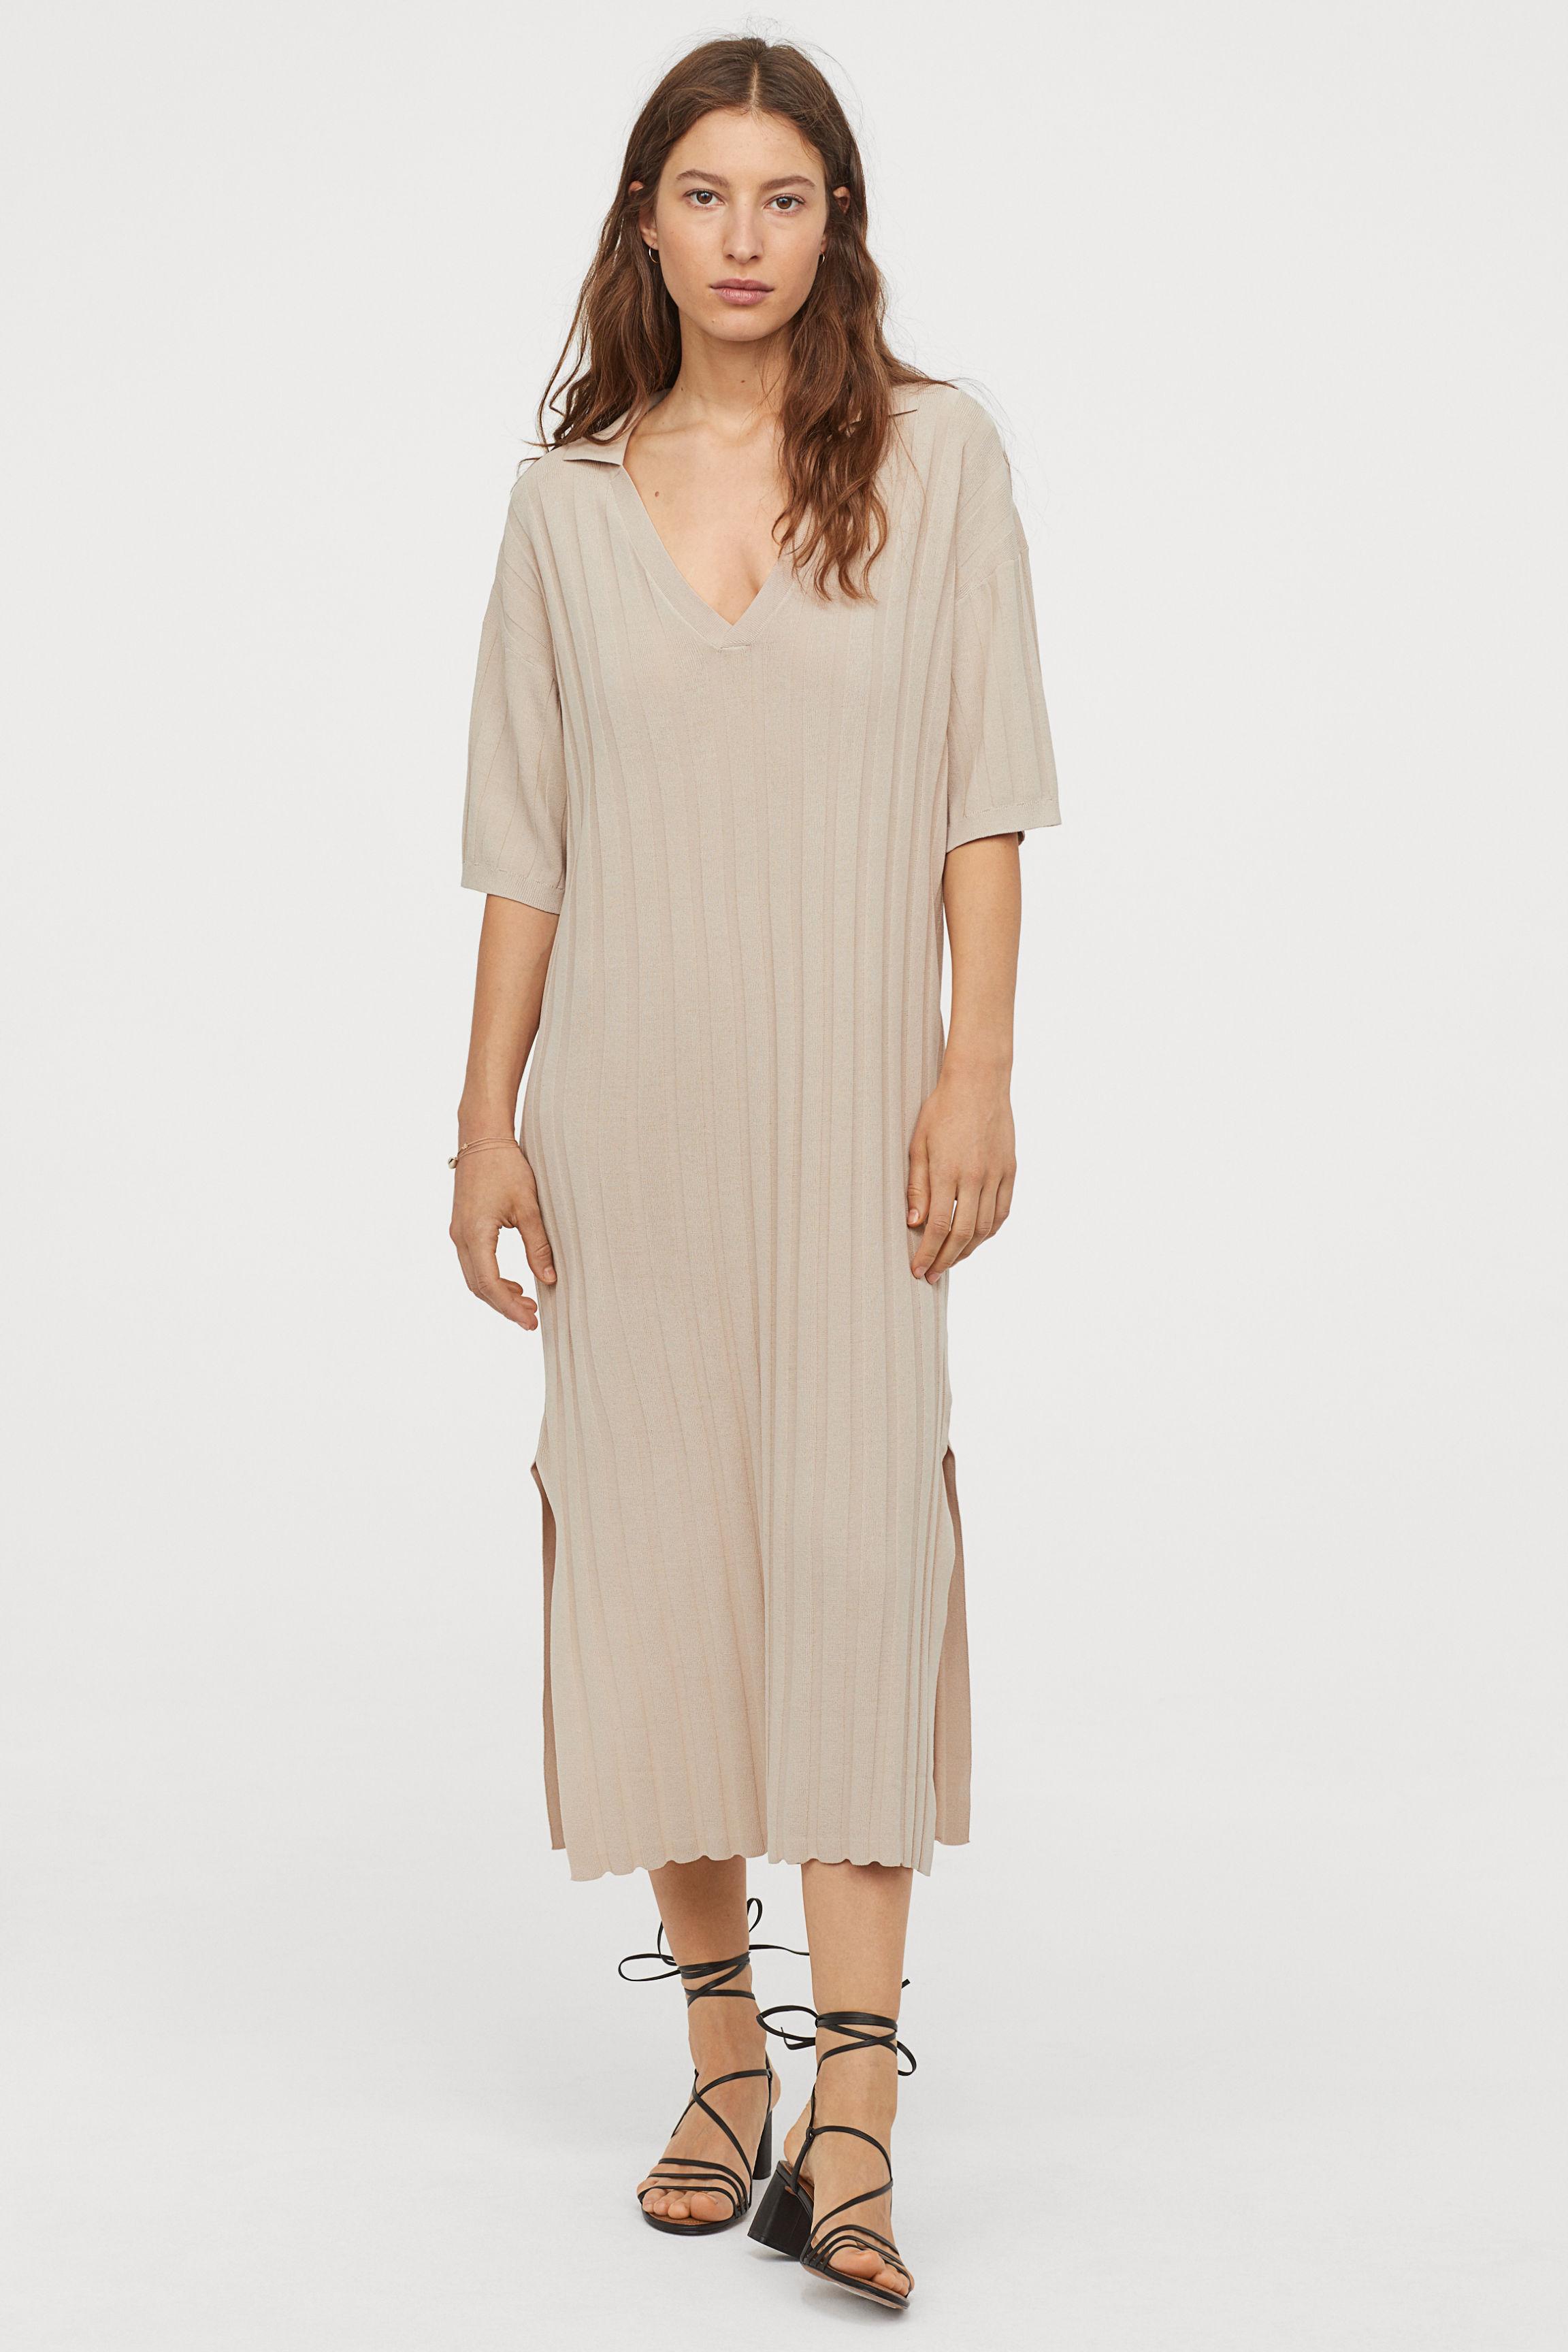 H&M Synthetic Fine-knit Dress in Light Beige (Natural) - Lyst